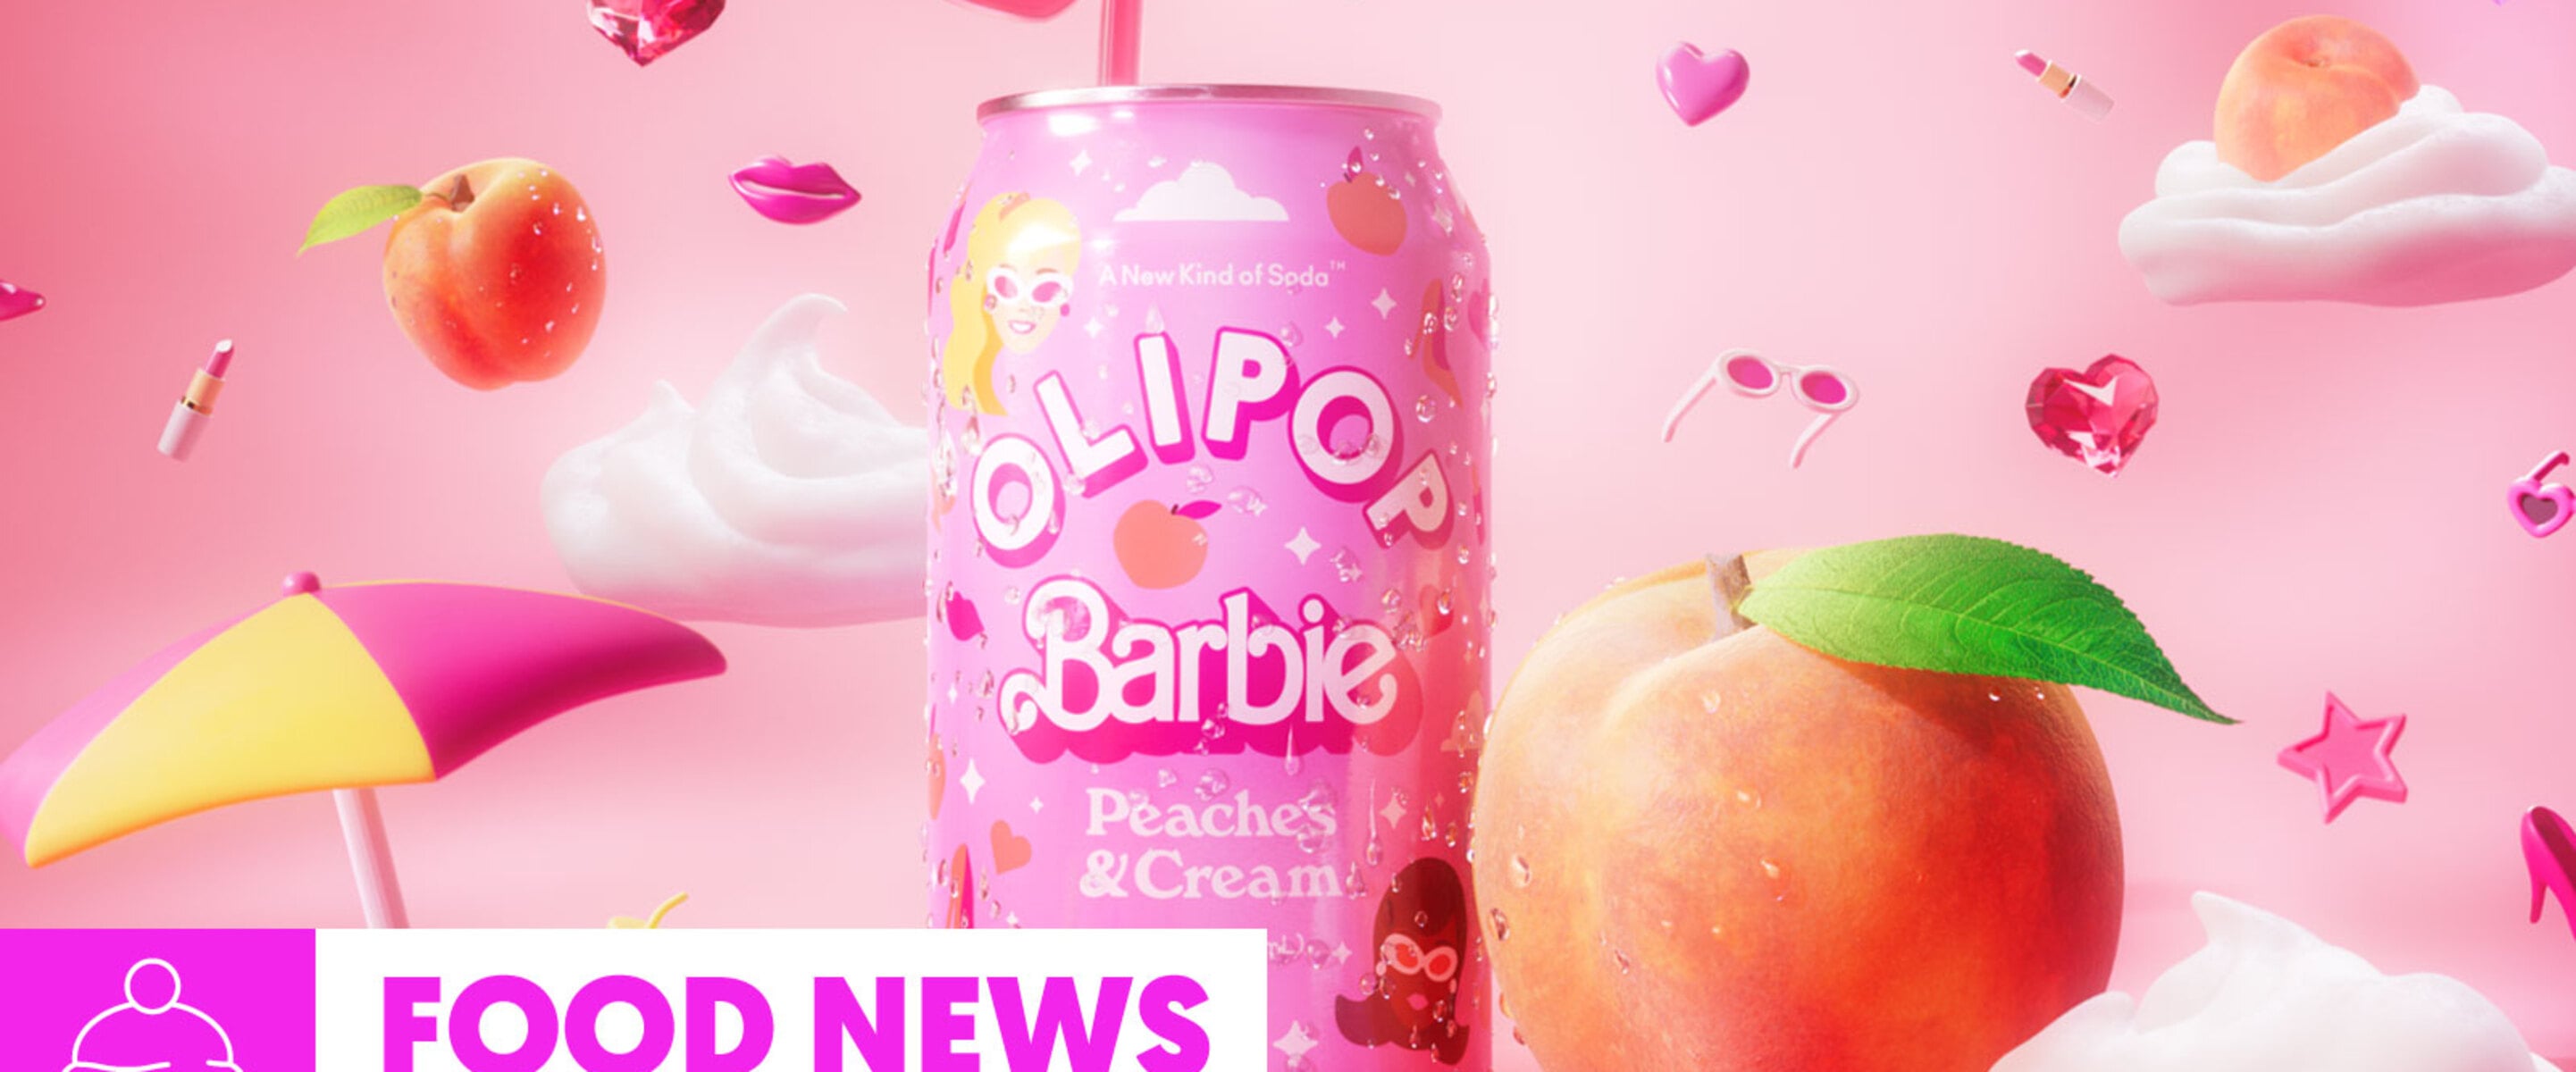 Foods News of the Week: Barbie Soda, Sour Patch Oreos, and Hailey Bieber’s Strawberry Ice Cream